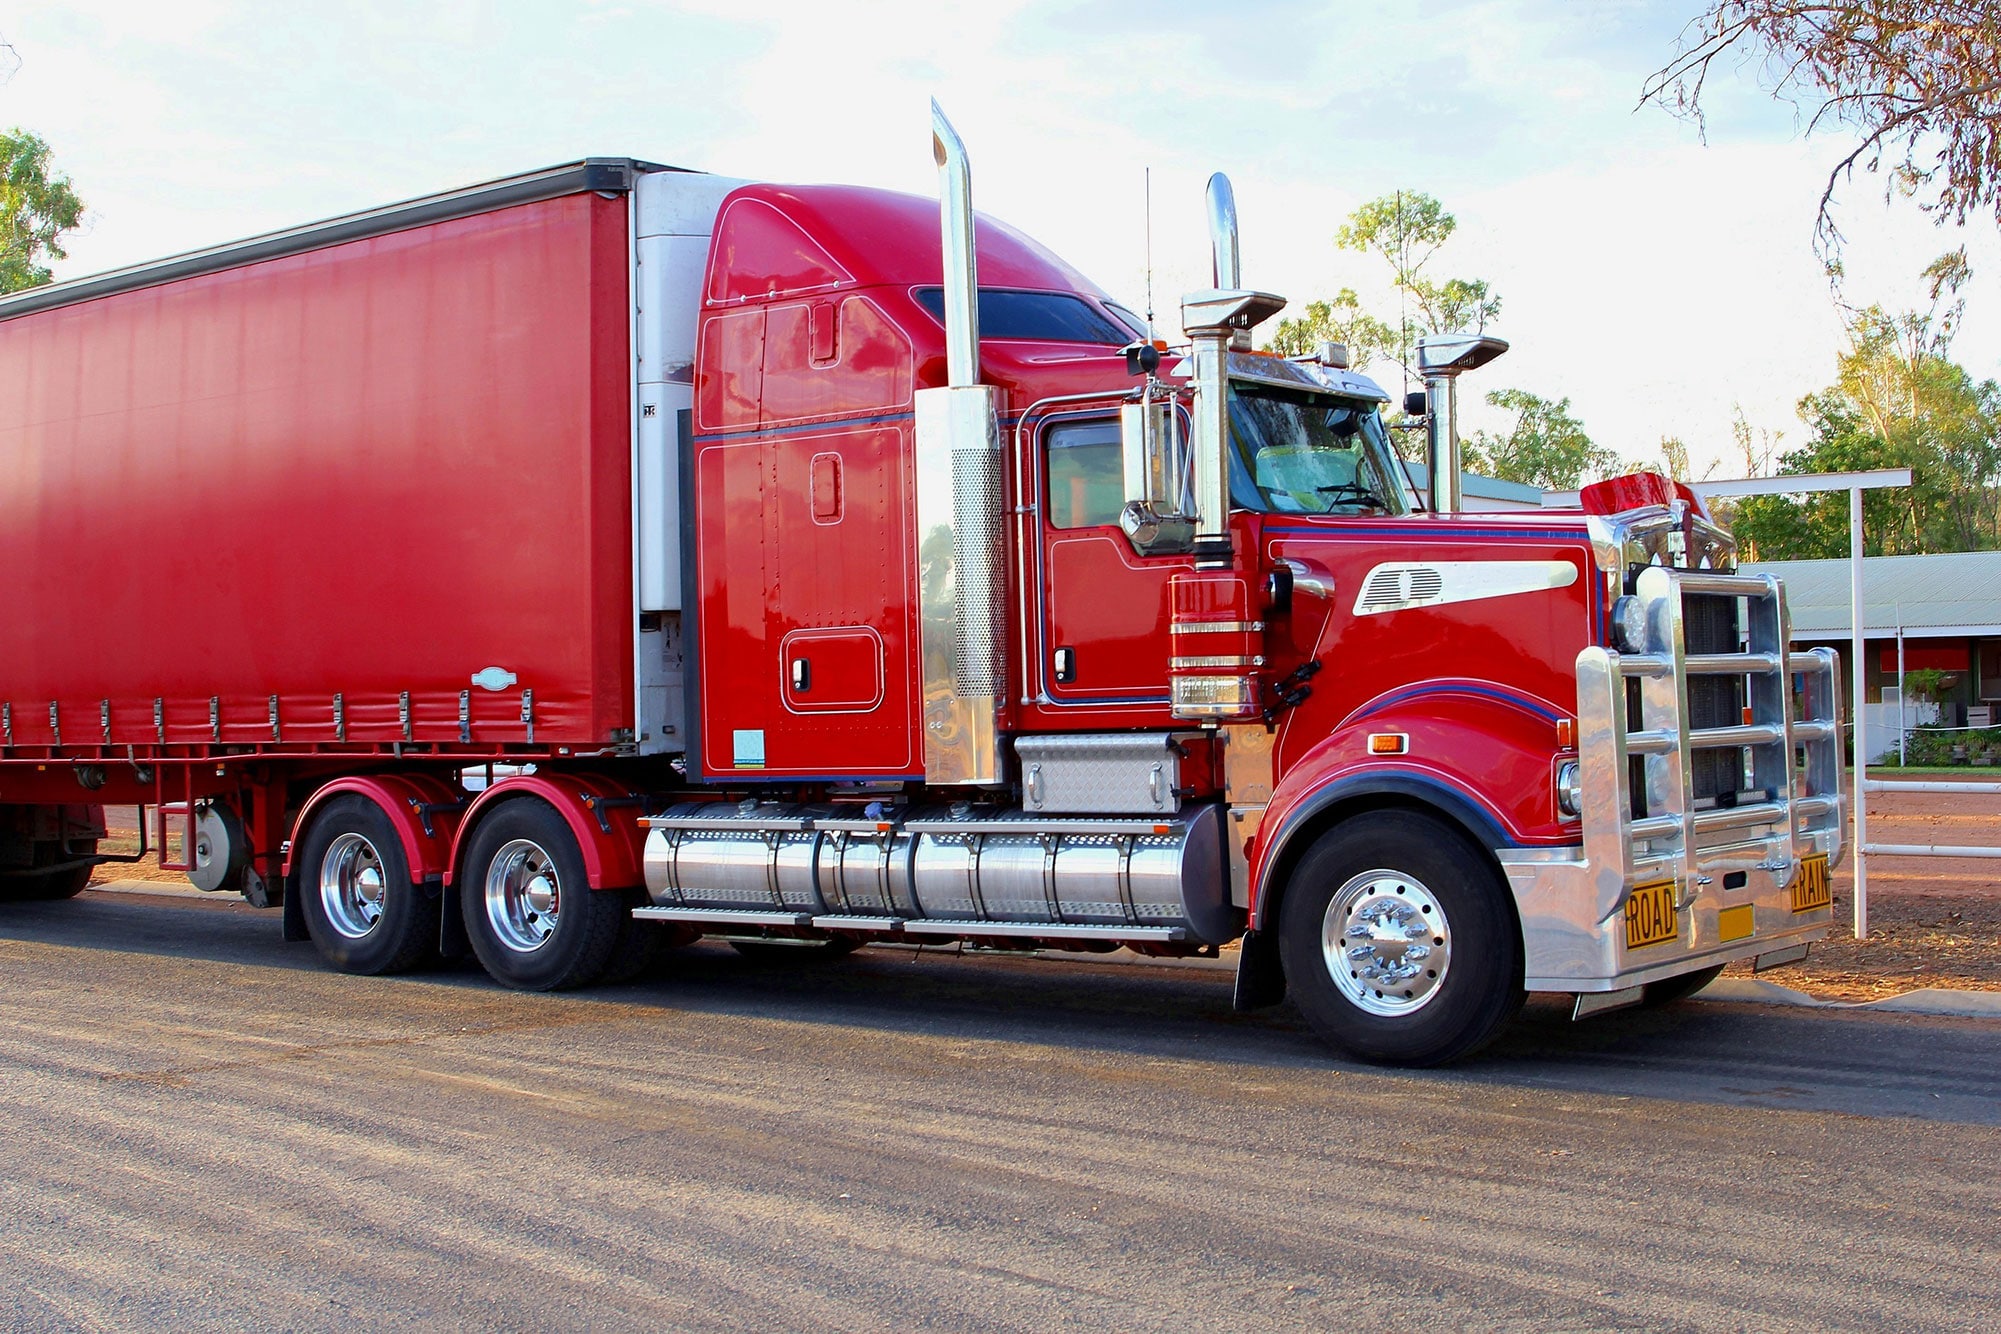 Rig Photo of a red Truck on the Road in Australia